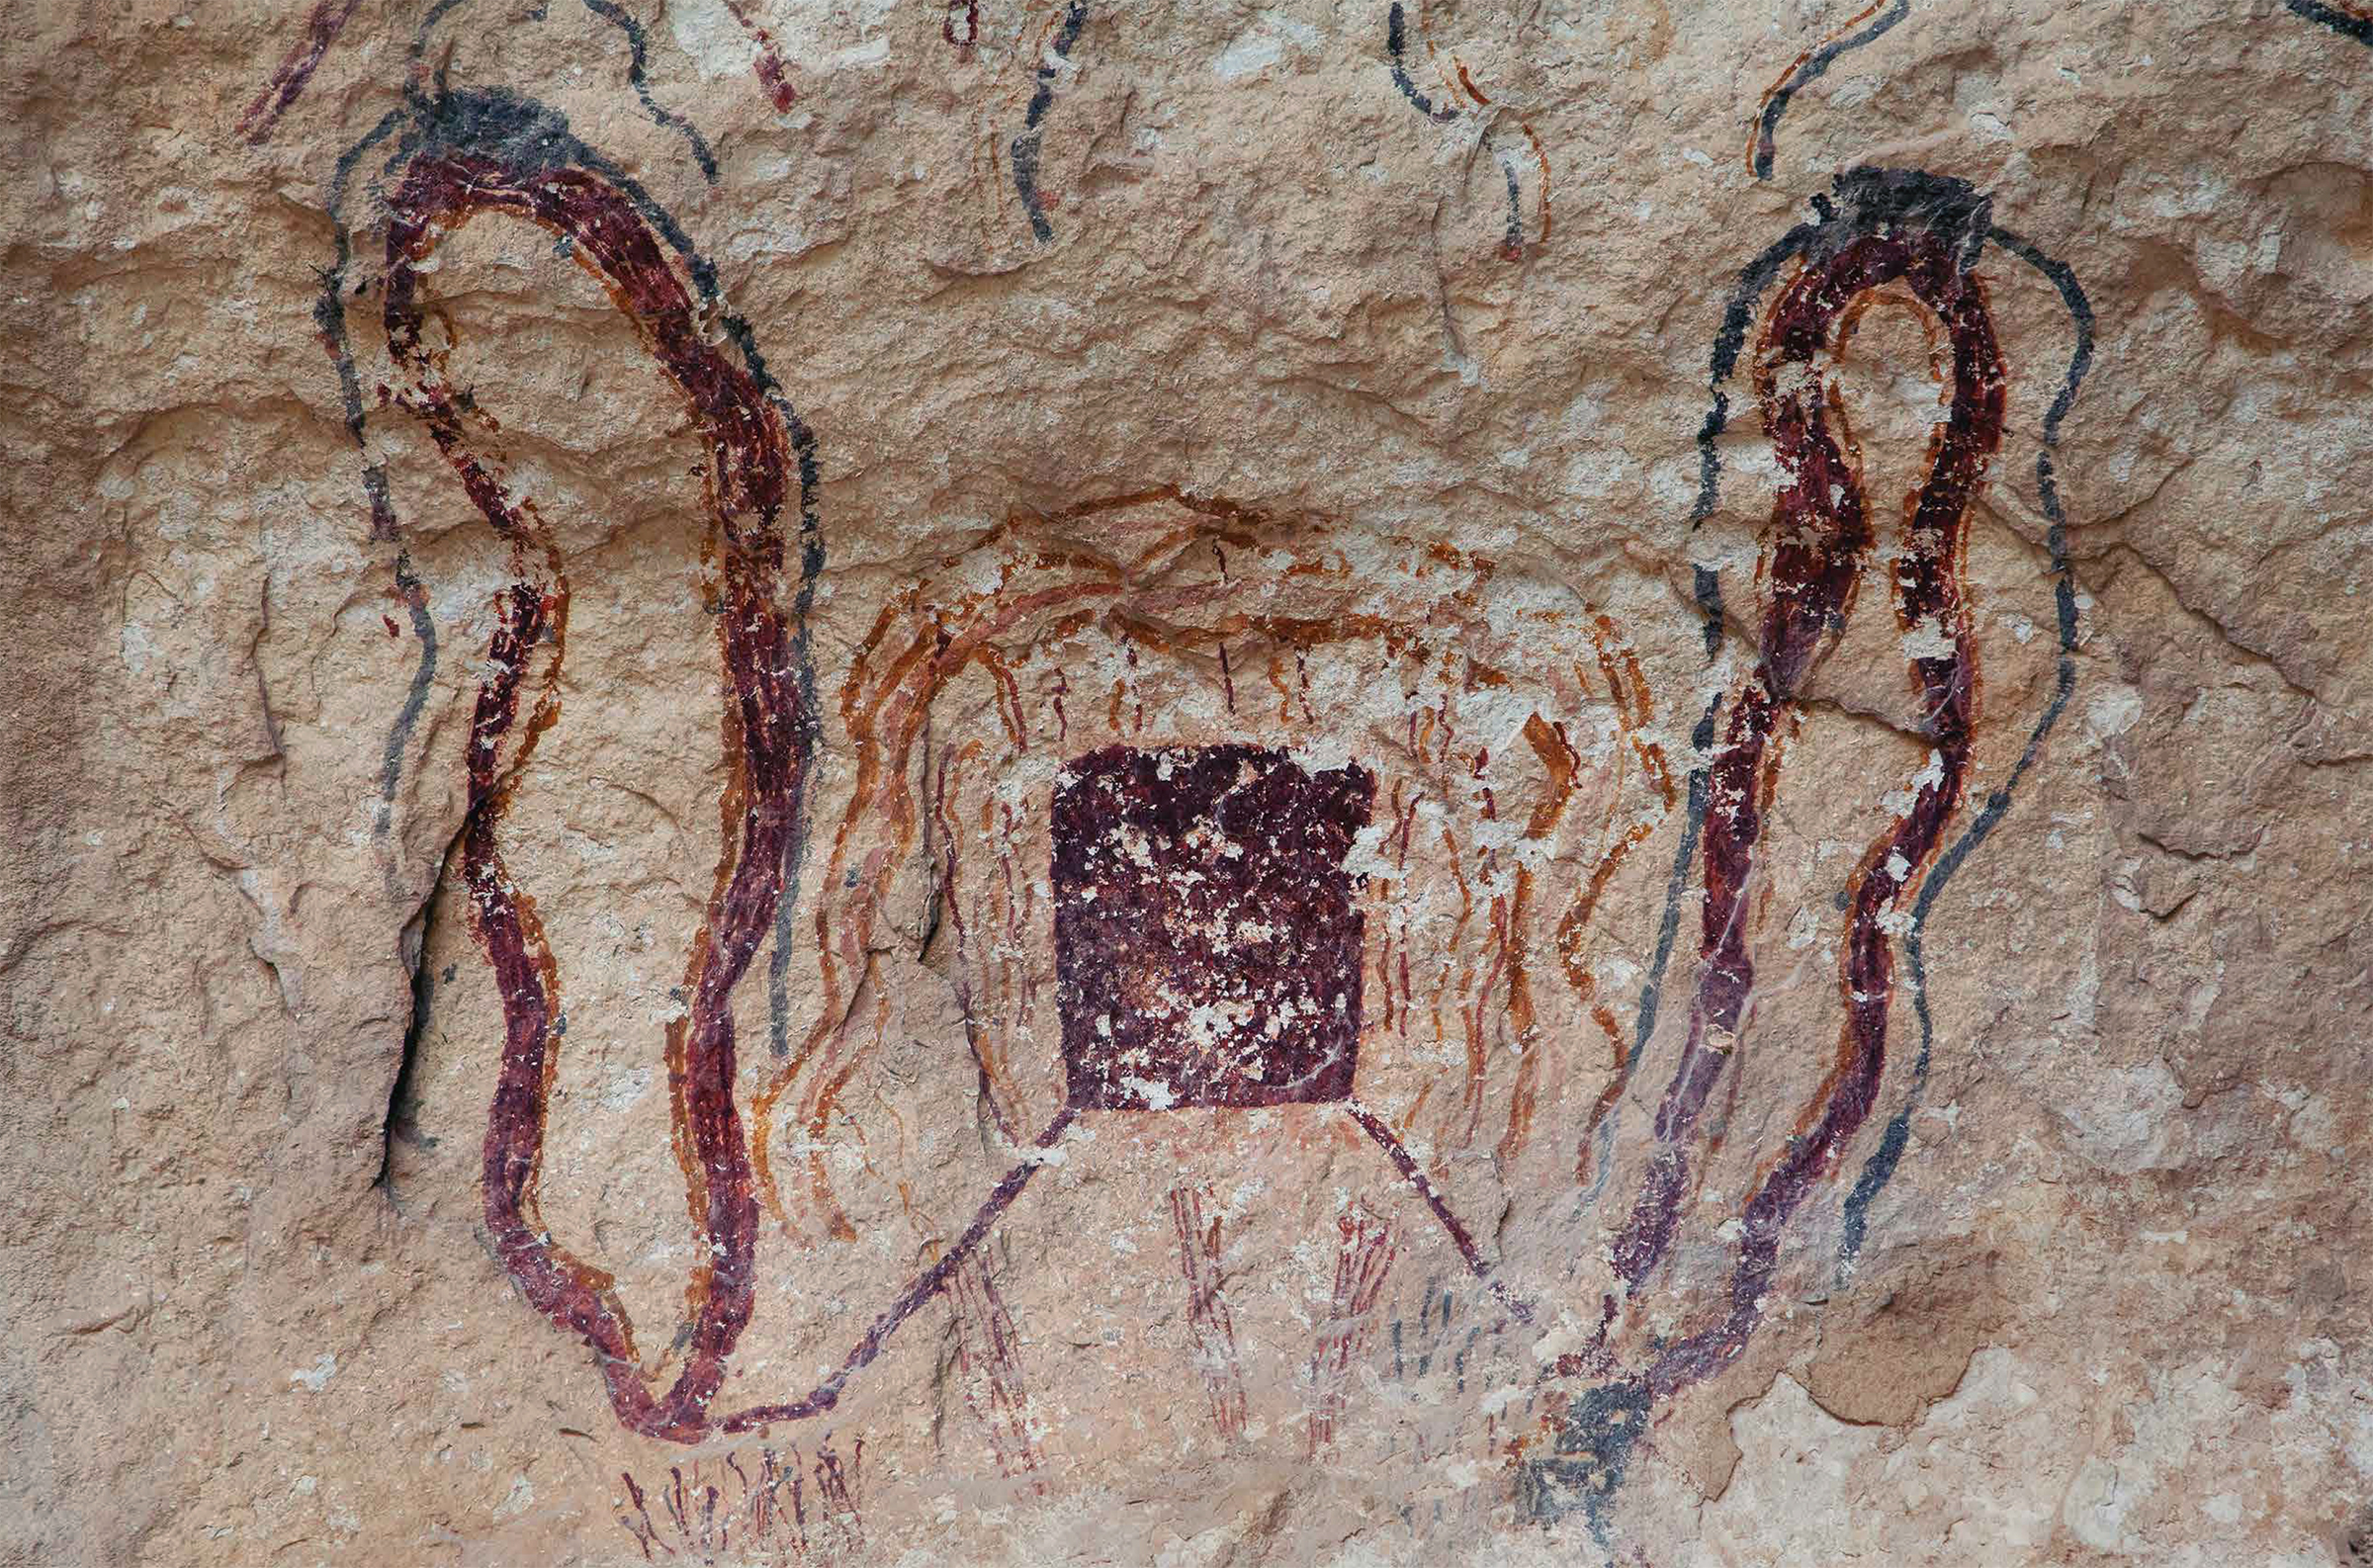 Boxes with legs arranged in complex compositions are a common motif in the Lower Pecos, but what they represent is unknown. This grouping from Black Cave is several meters above the shelter floor and spans 2 meters